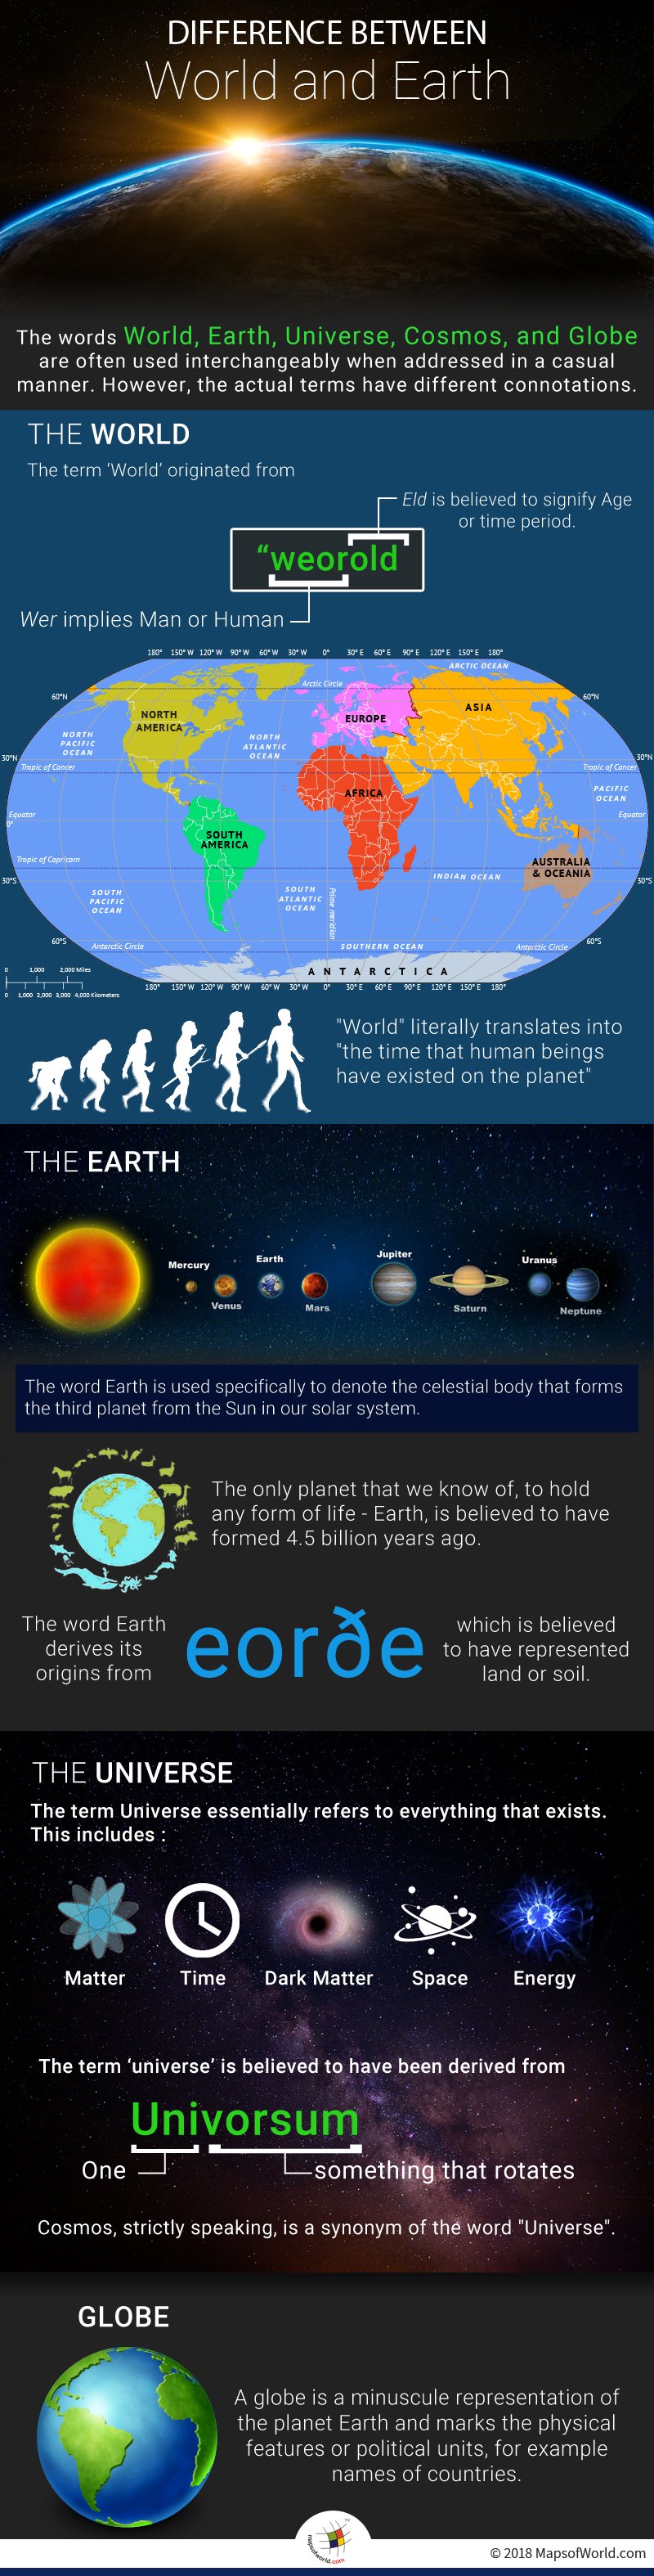 Infographic elaborating difference between World and Earth